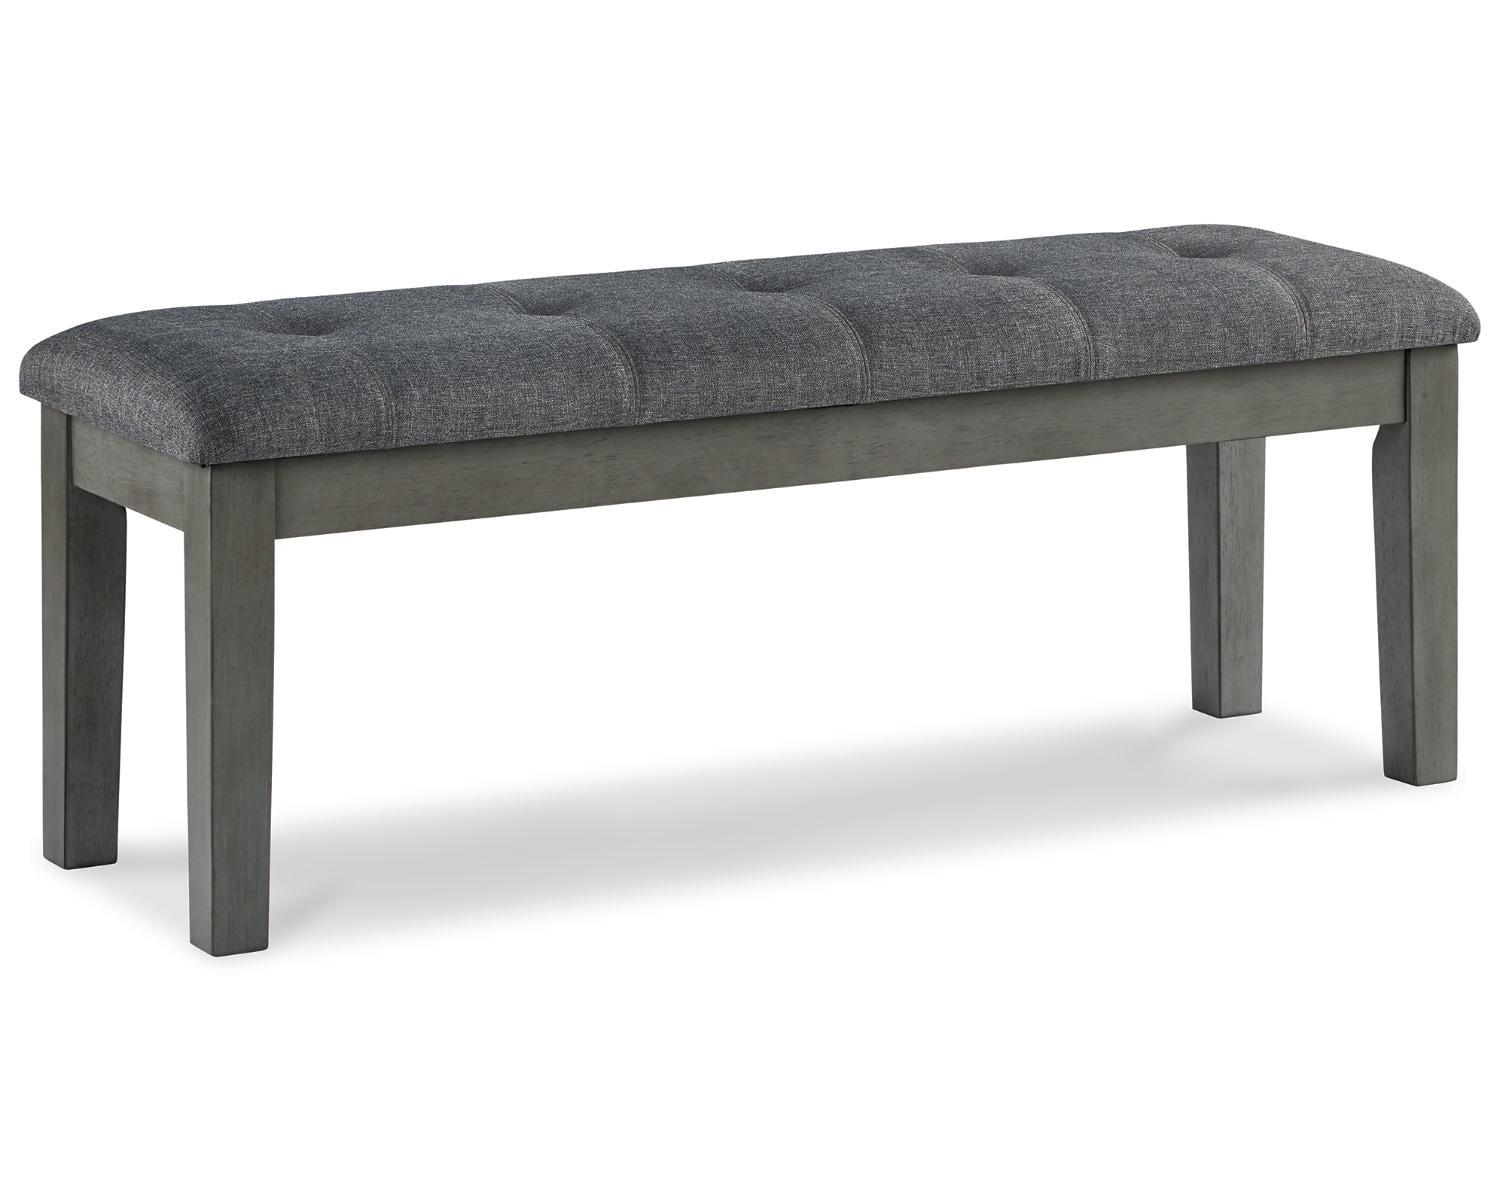 Hallanden 50" Two-Tone Gray Cushioned Dining Bench